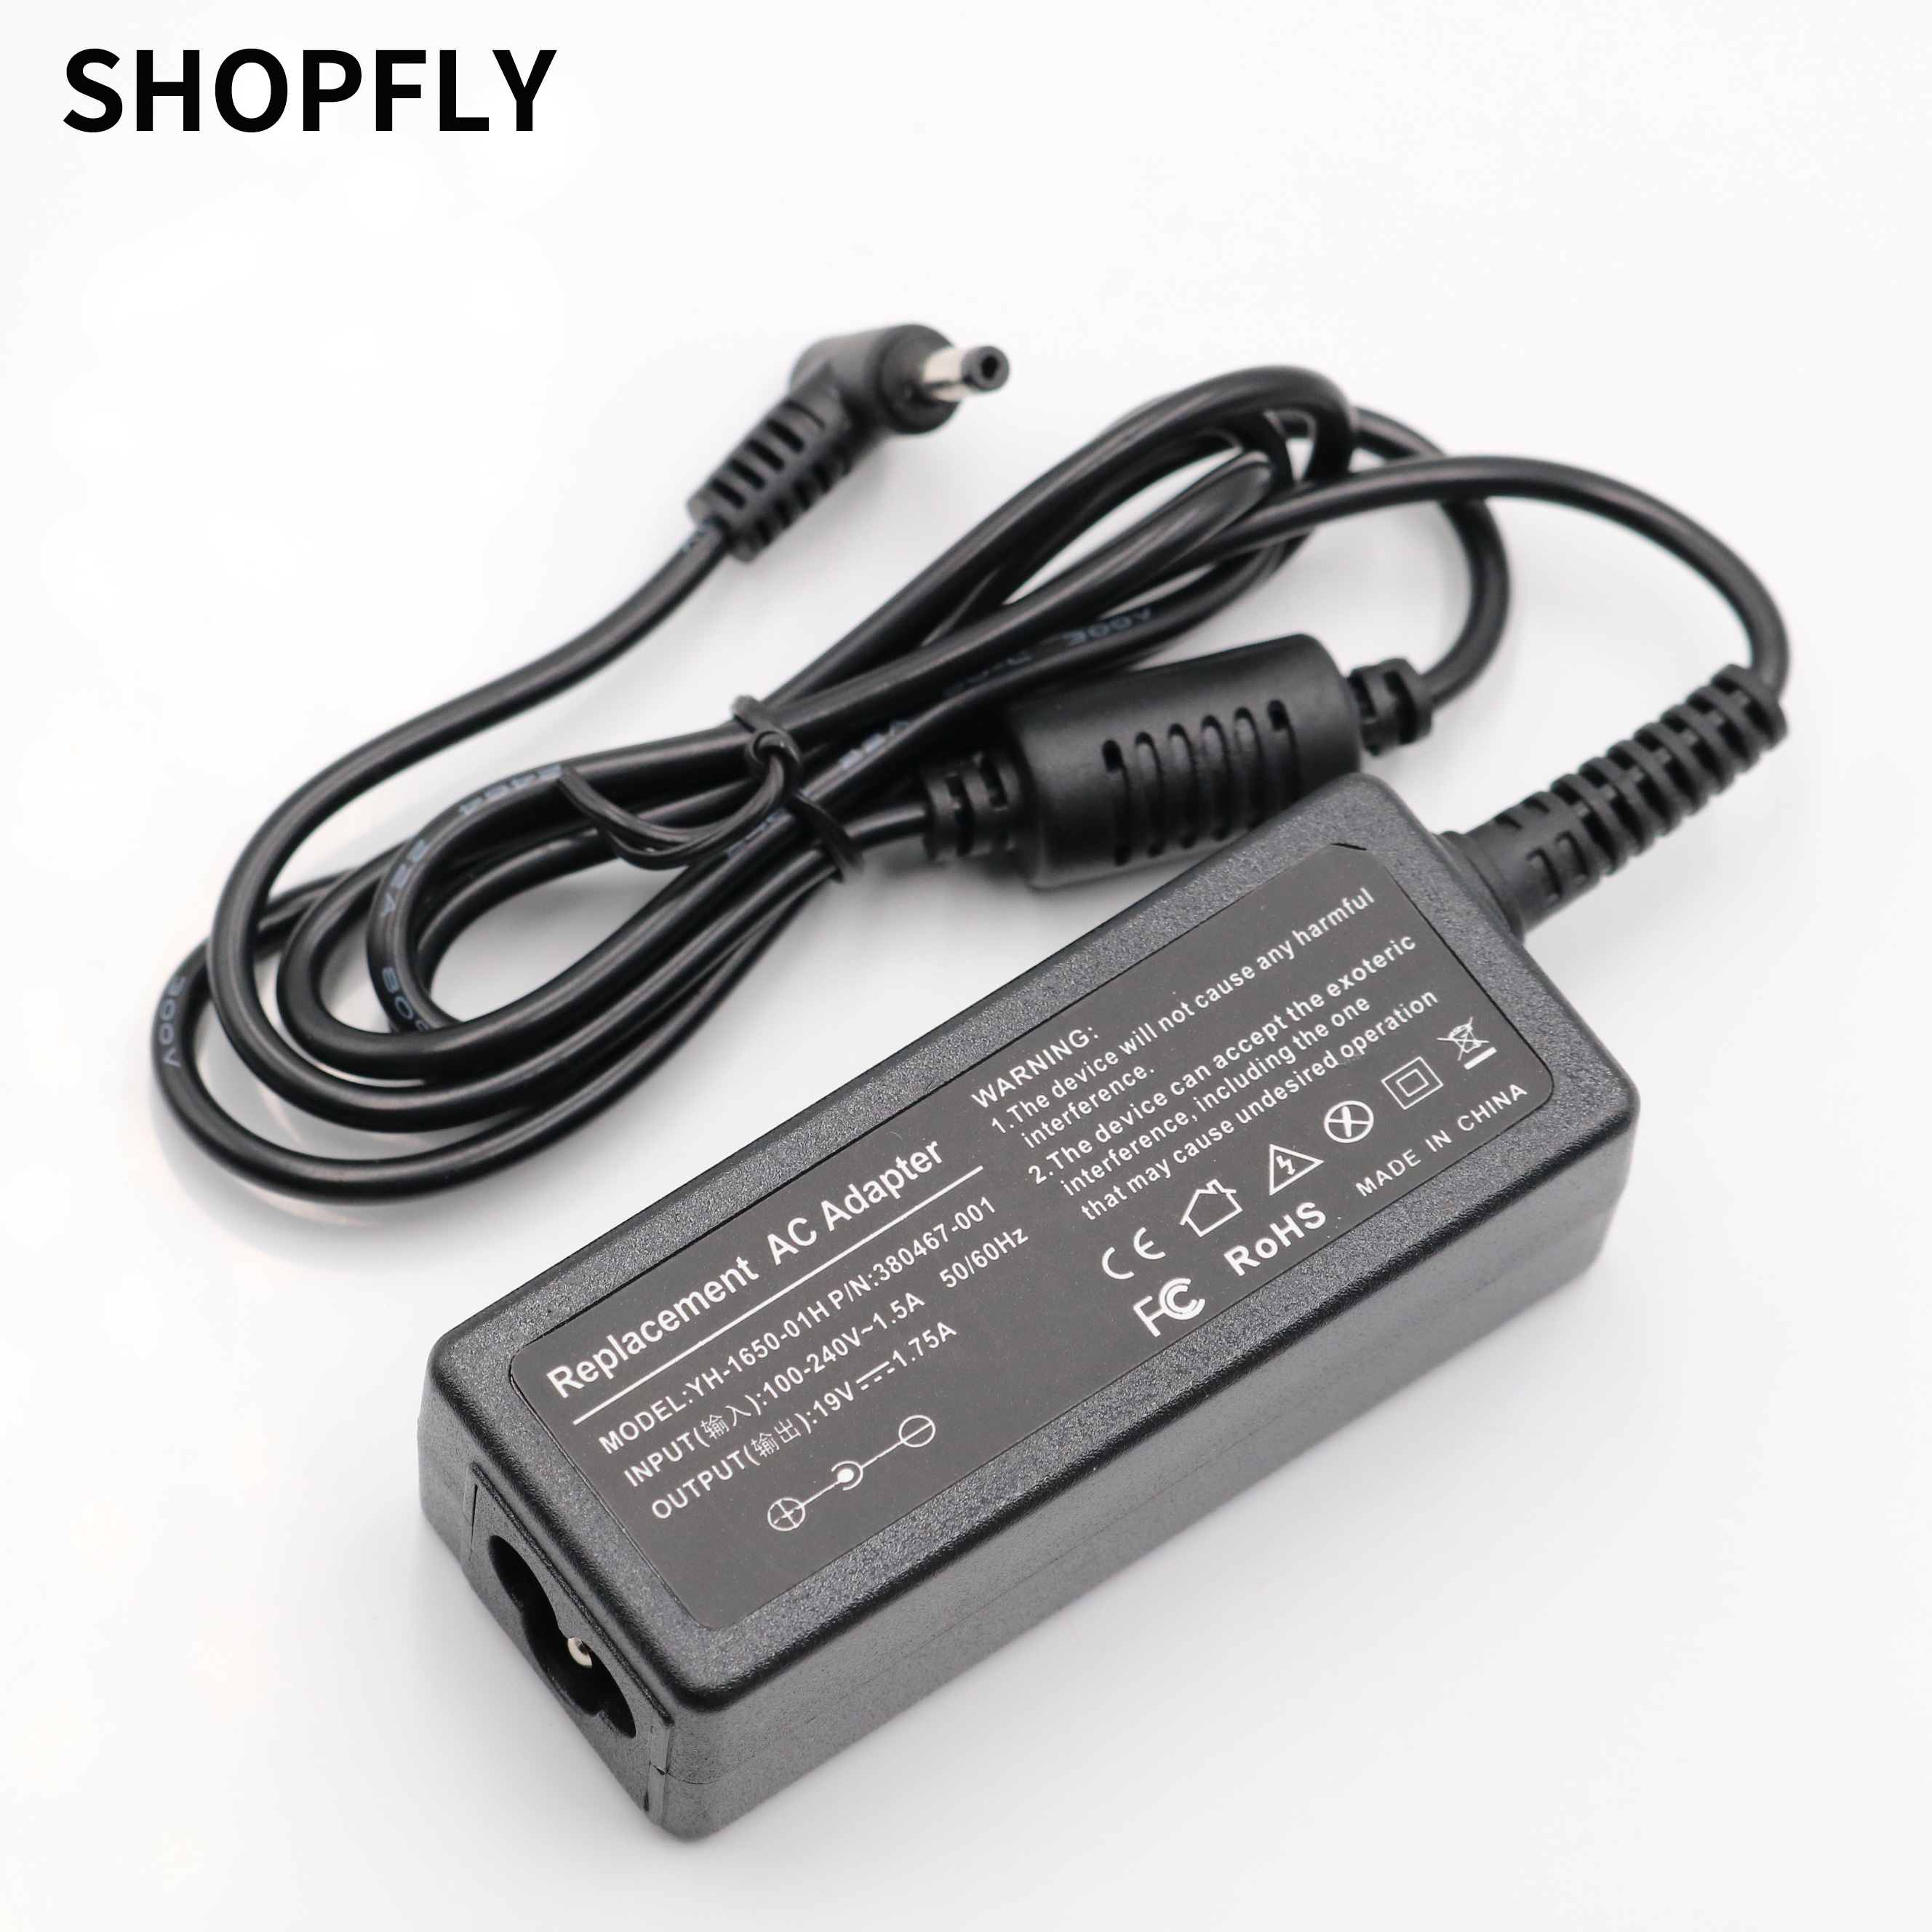 Asus 19V 1.75A 33W Ac Laptop Power Adapter Travel Charger Voor Asus Vivobook S200 S220 X200T X202E X553M q200E X201E ADP-33AW